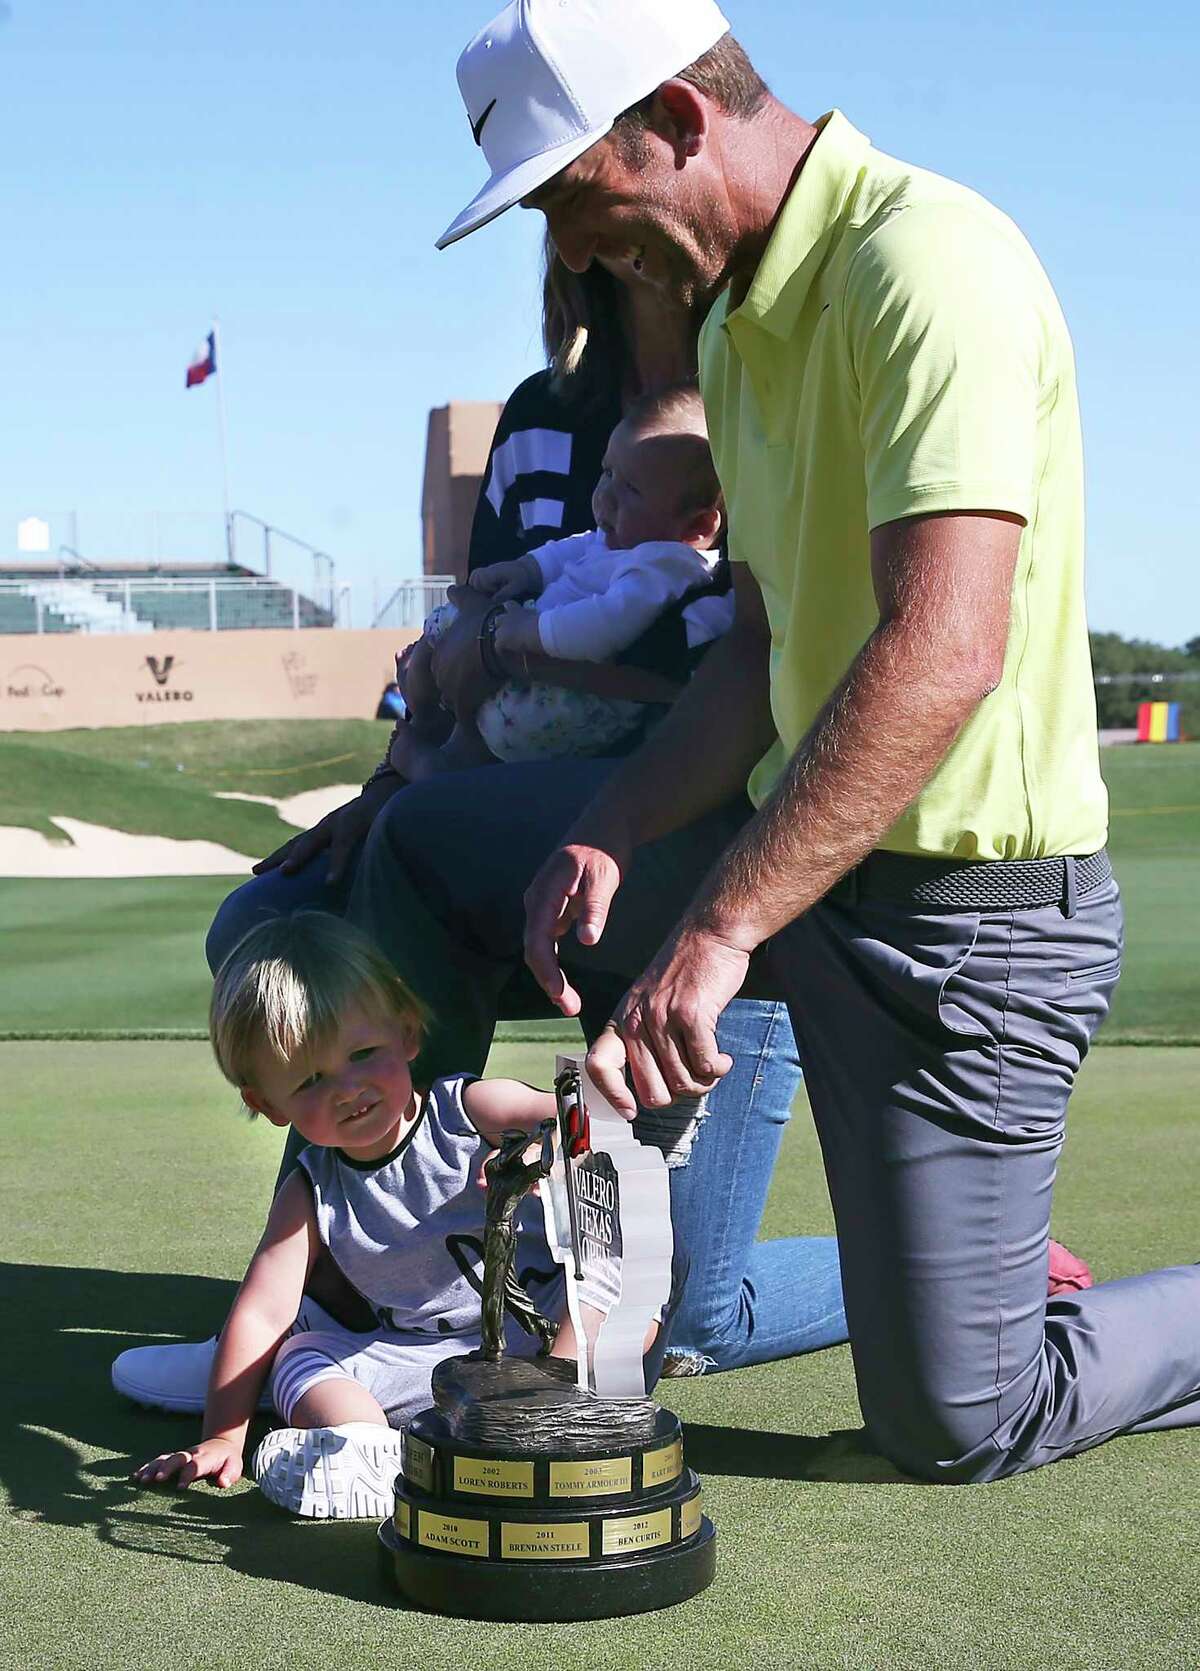 Two year old Wyatt Chappell shows immediate interest in the trophy as he gets in a family photo with the champion Kevin Chappell after the final round of the Valero Texas Open at TPC San Antonio Oaks Course on April 23, 2017.